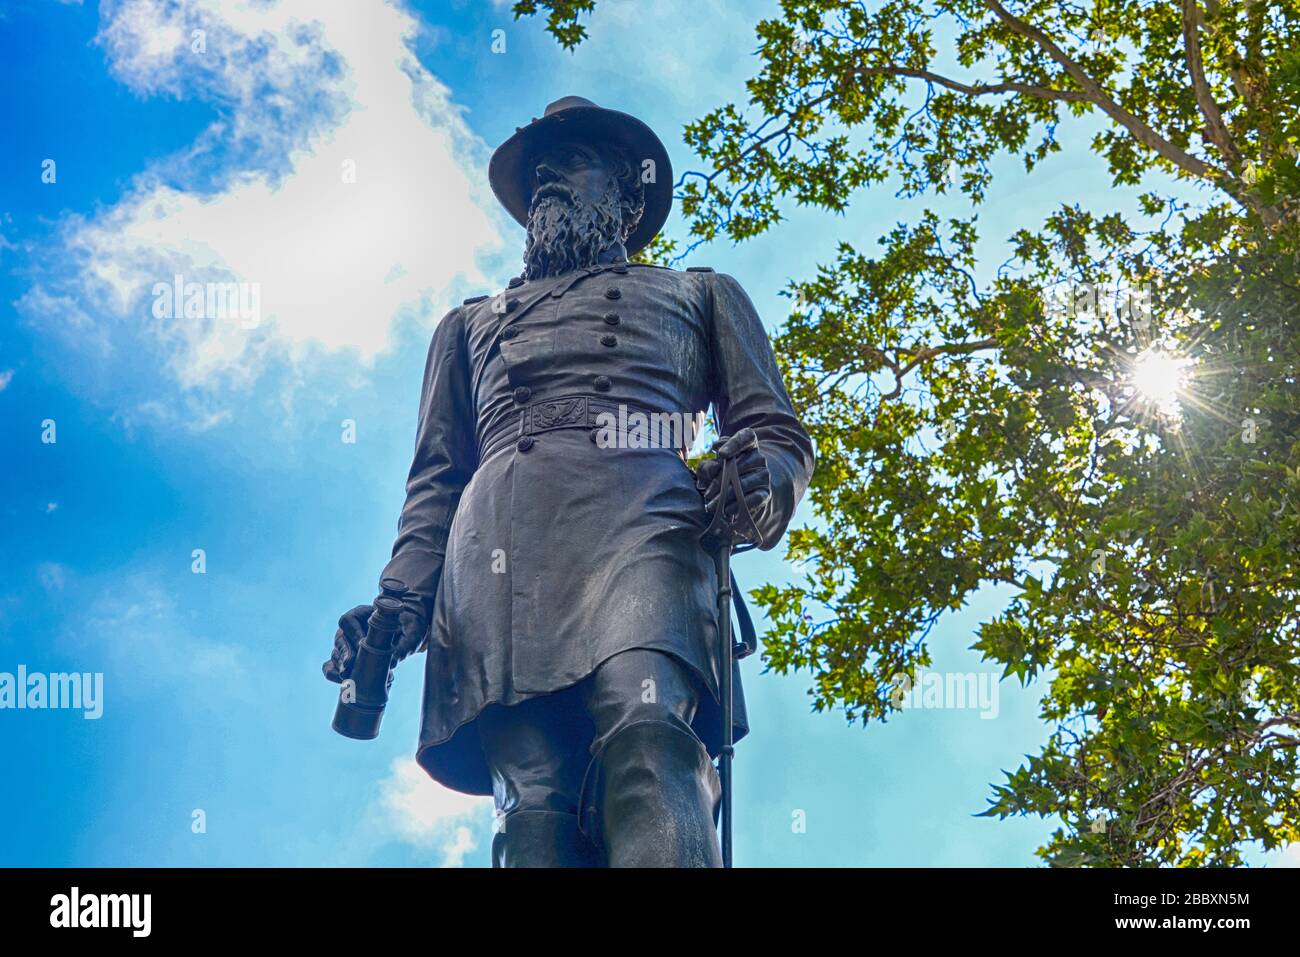 Statue of John Aaron Rawlins, a Union Army general who served during the Civil War and later as Secretary of War. Washington, D.C. Stock Photo